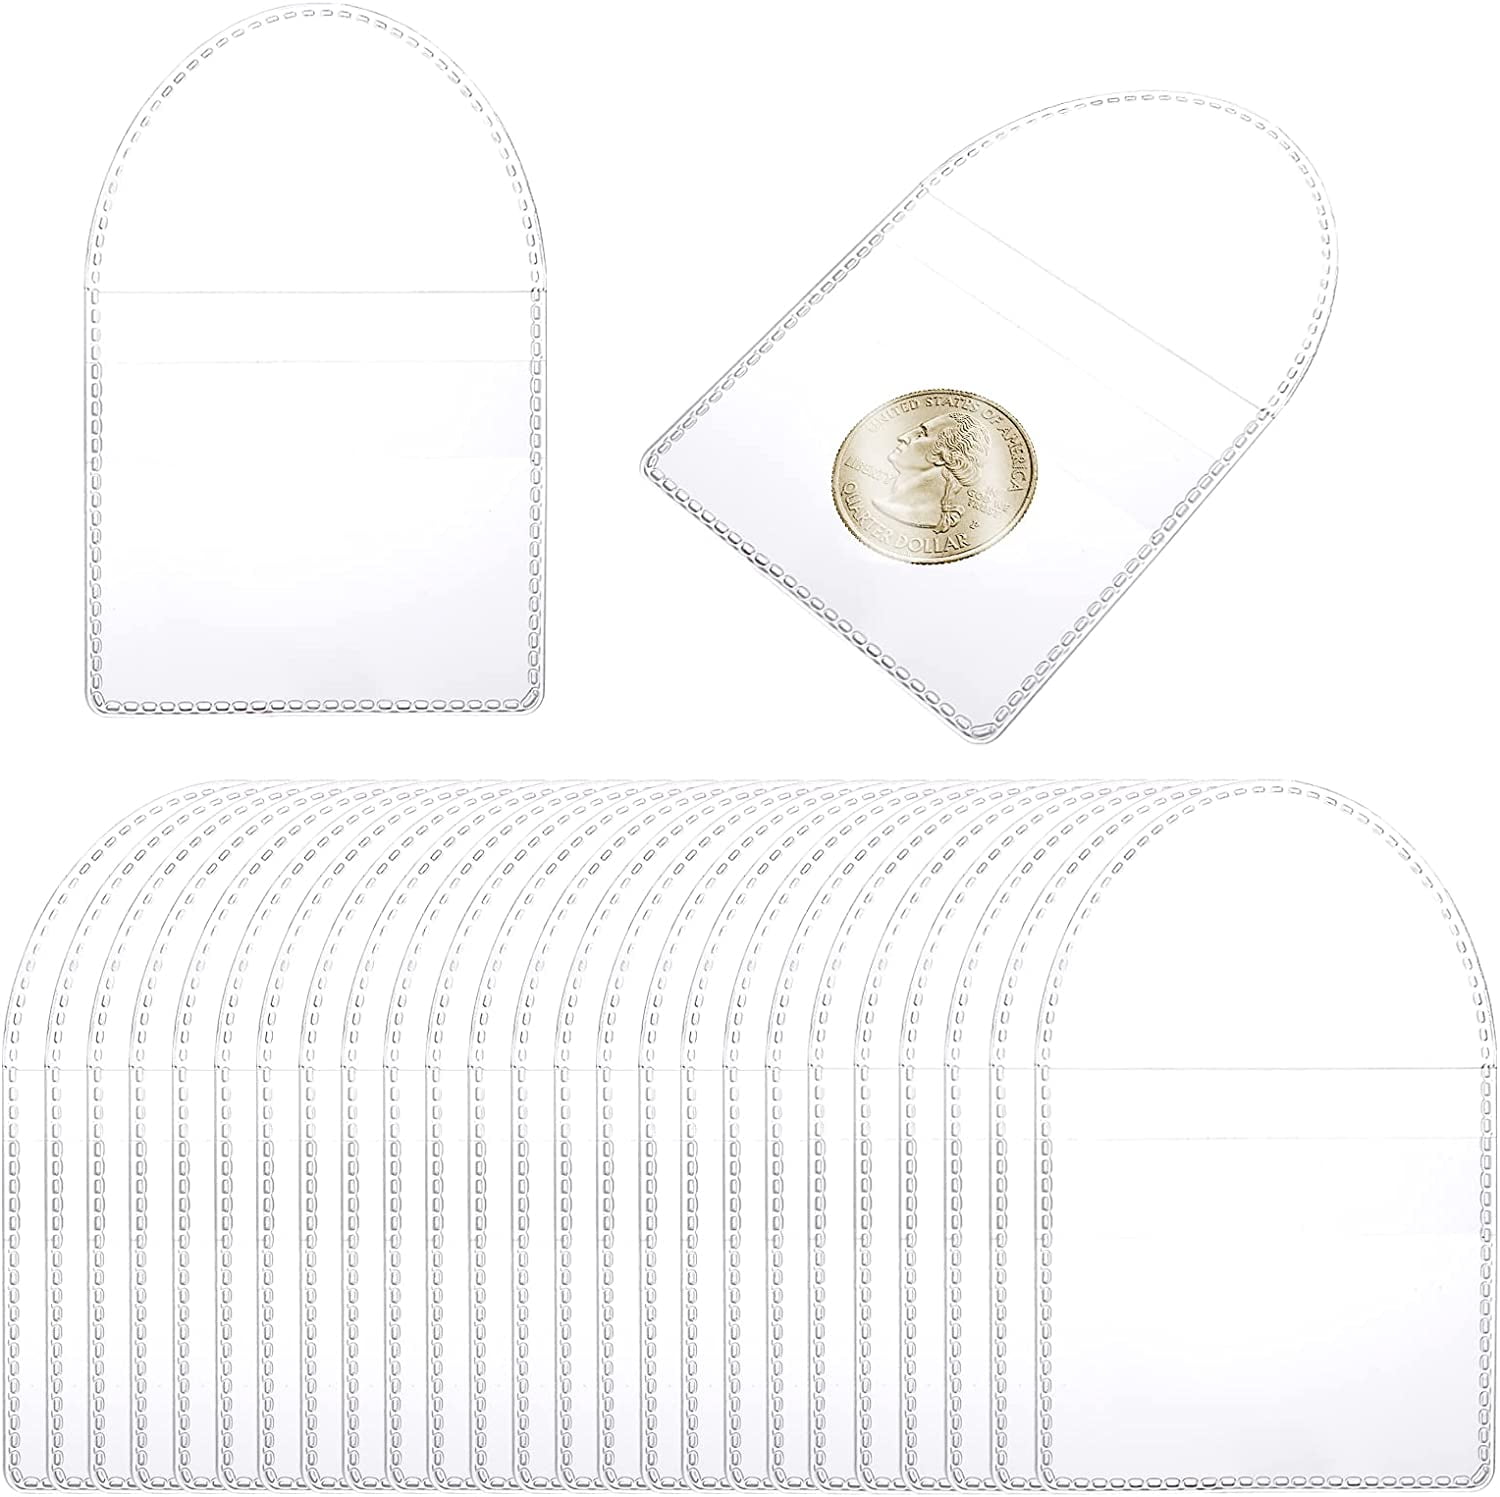 OLYCRAFT 100 Pcs Single Pocket Coin Flips 2 Styles Individual Clear Plastic  Sleeves Holders Coin Collecting Supplies for Coins Jewelry Small Items